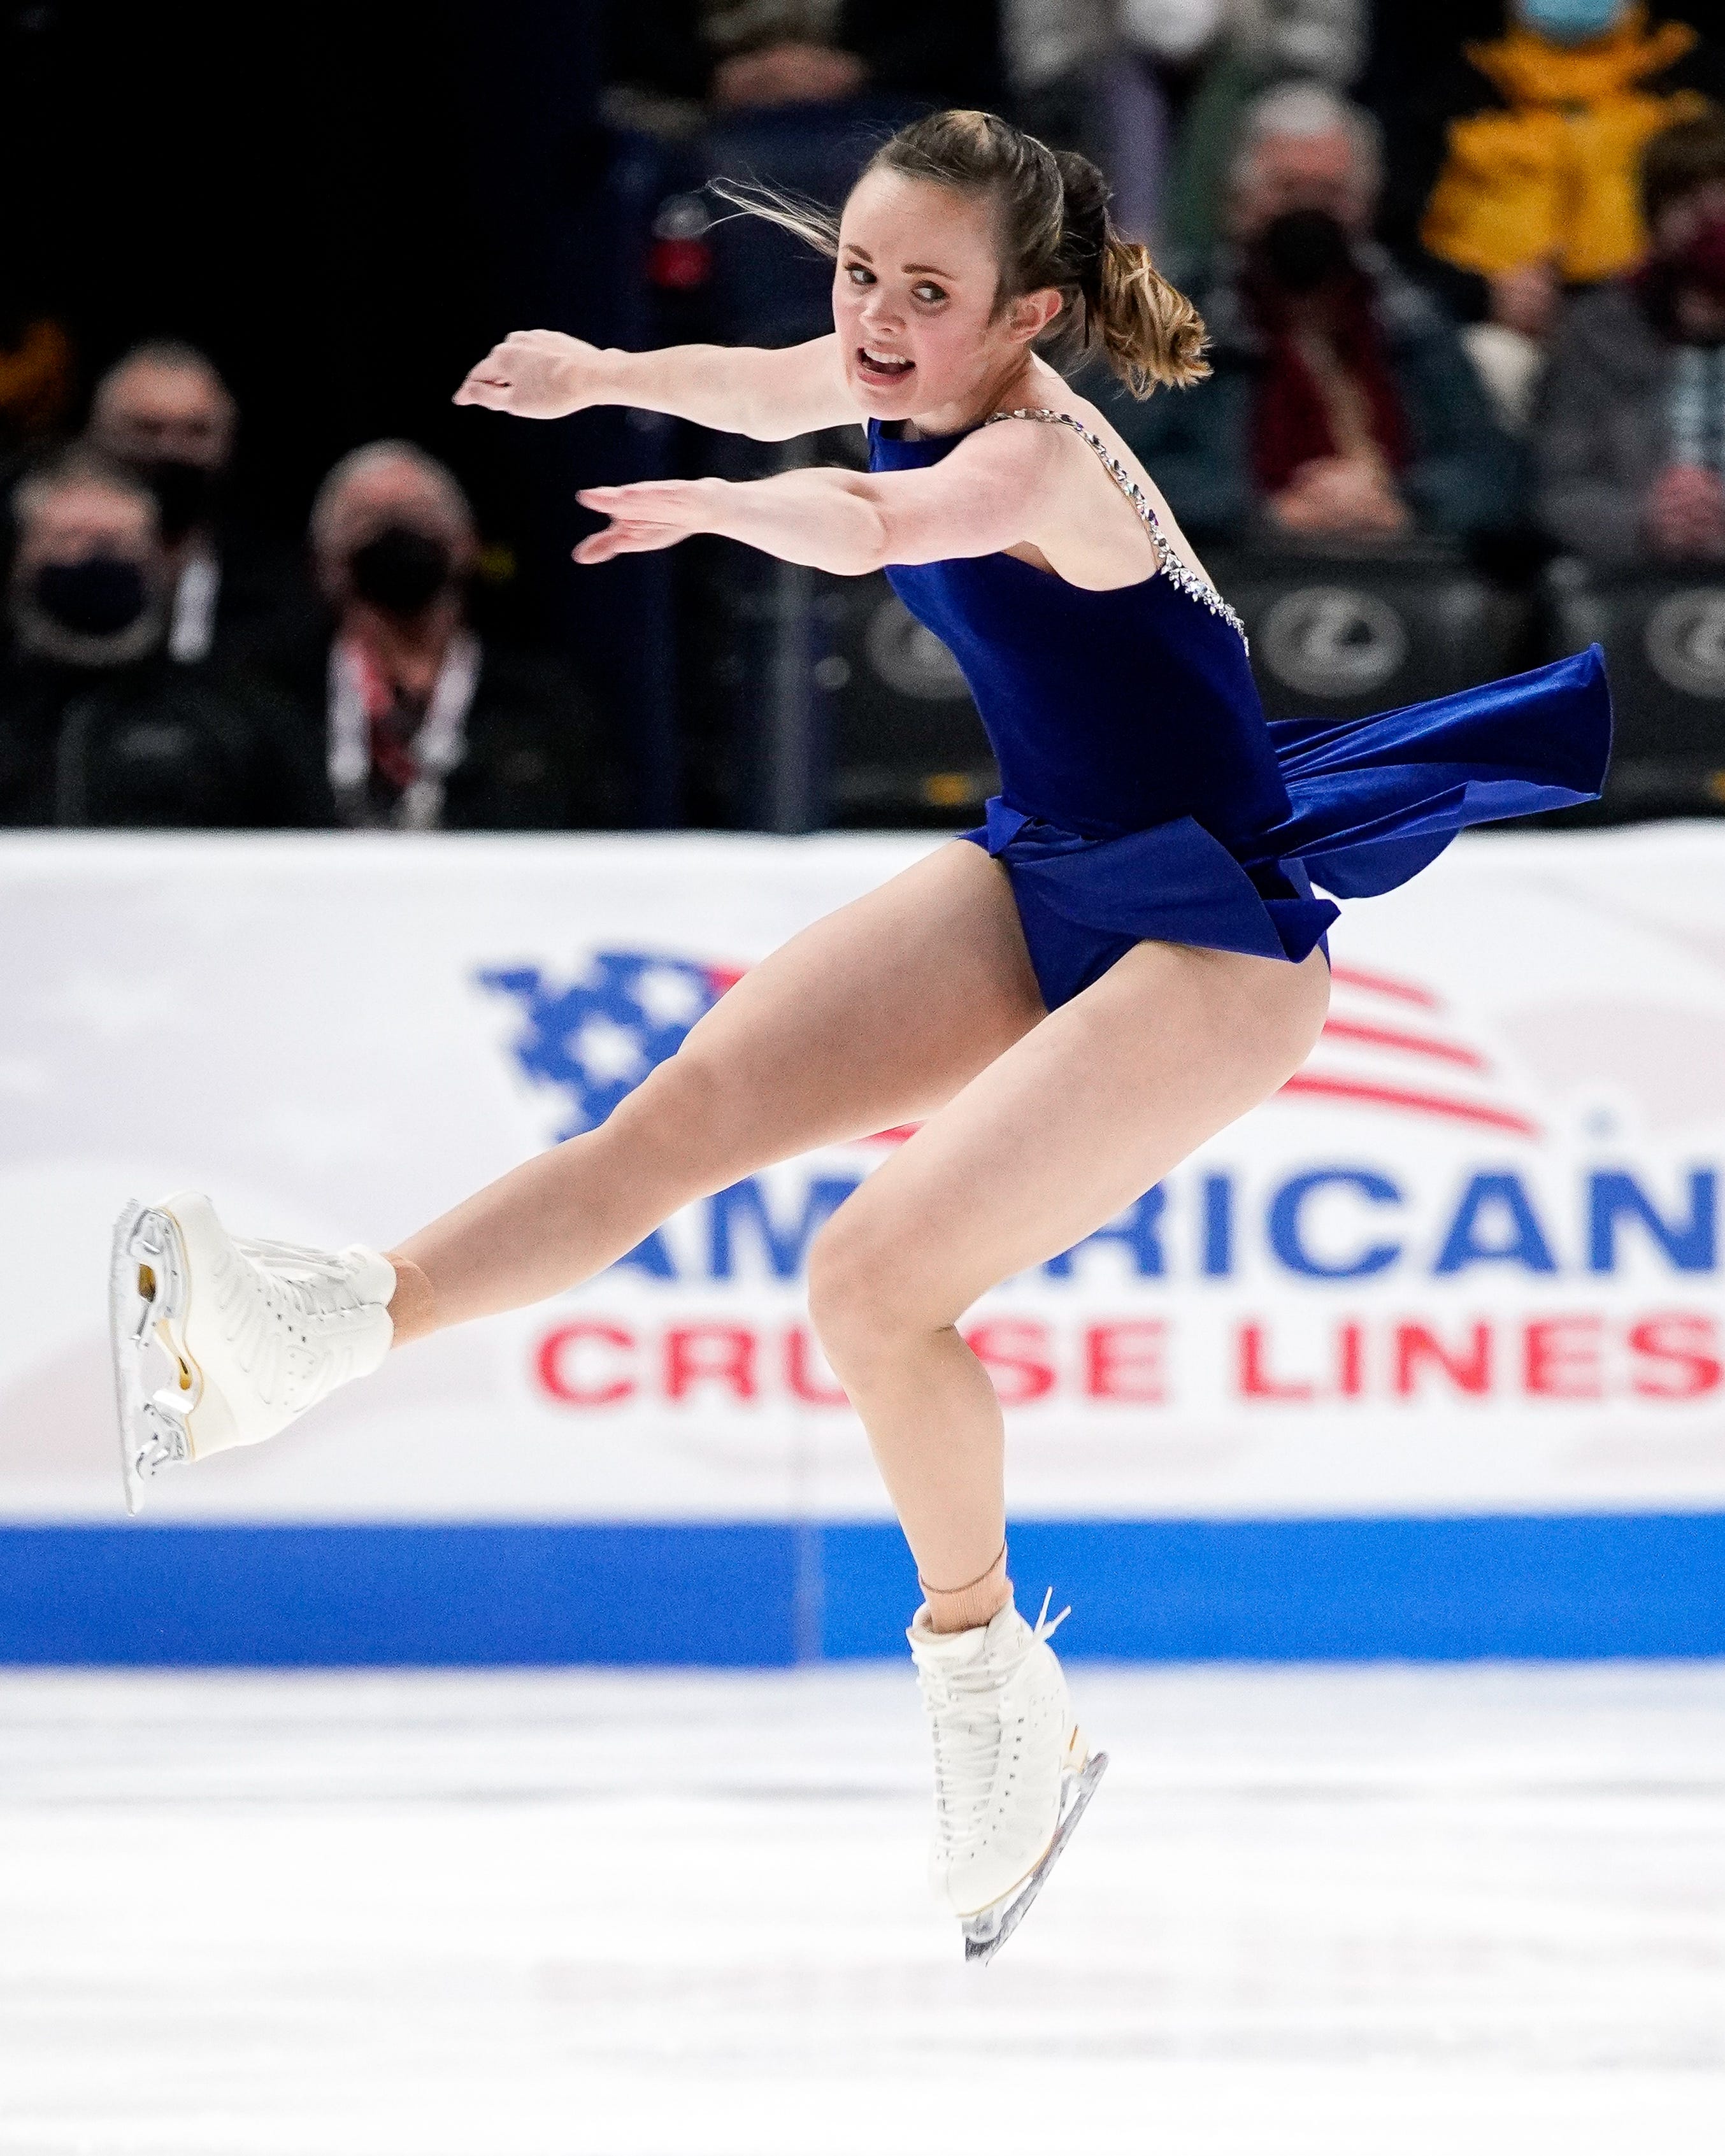 How to watch 2022 US Figure Skating Championships on TV, live stream